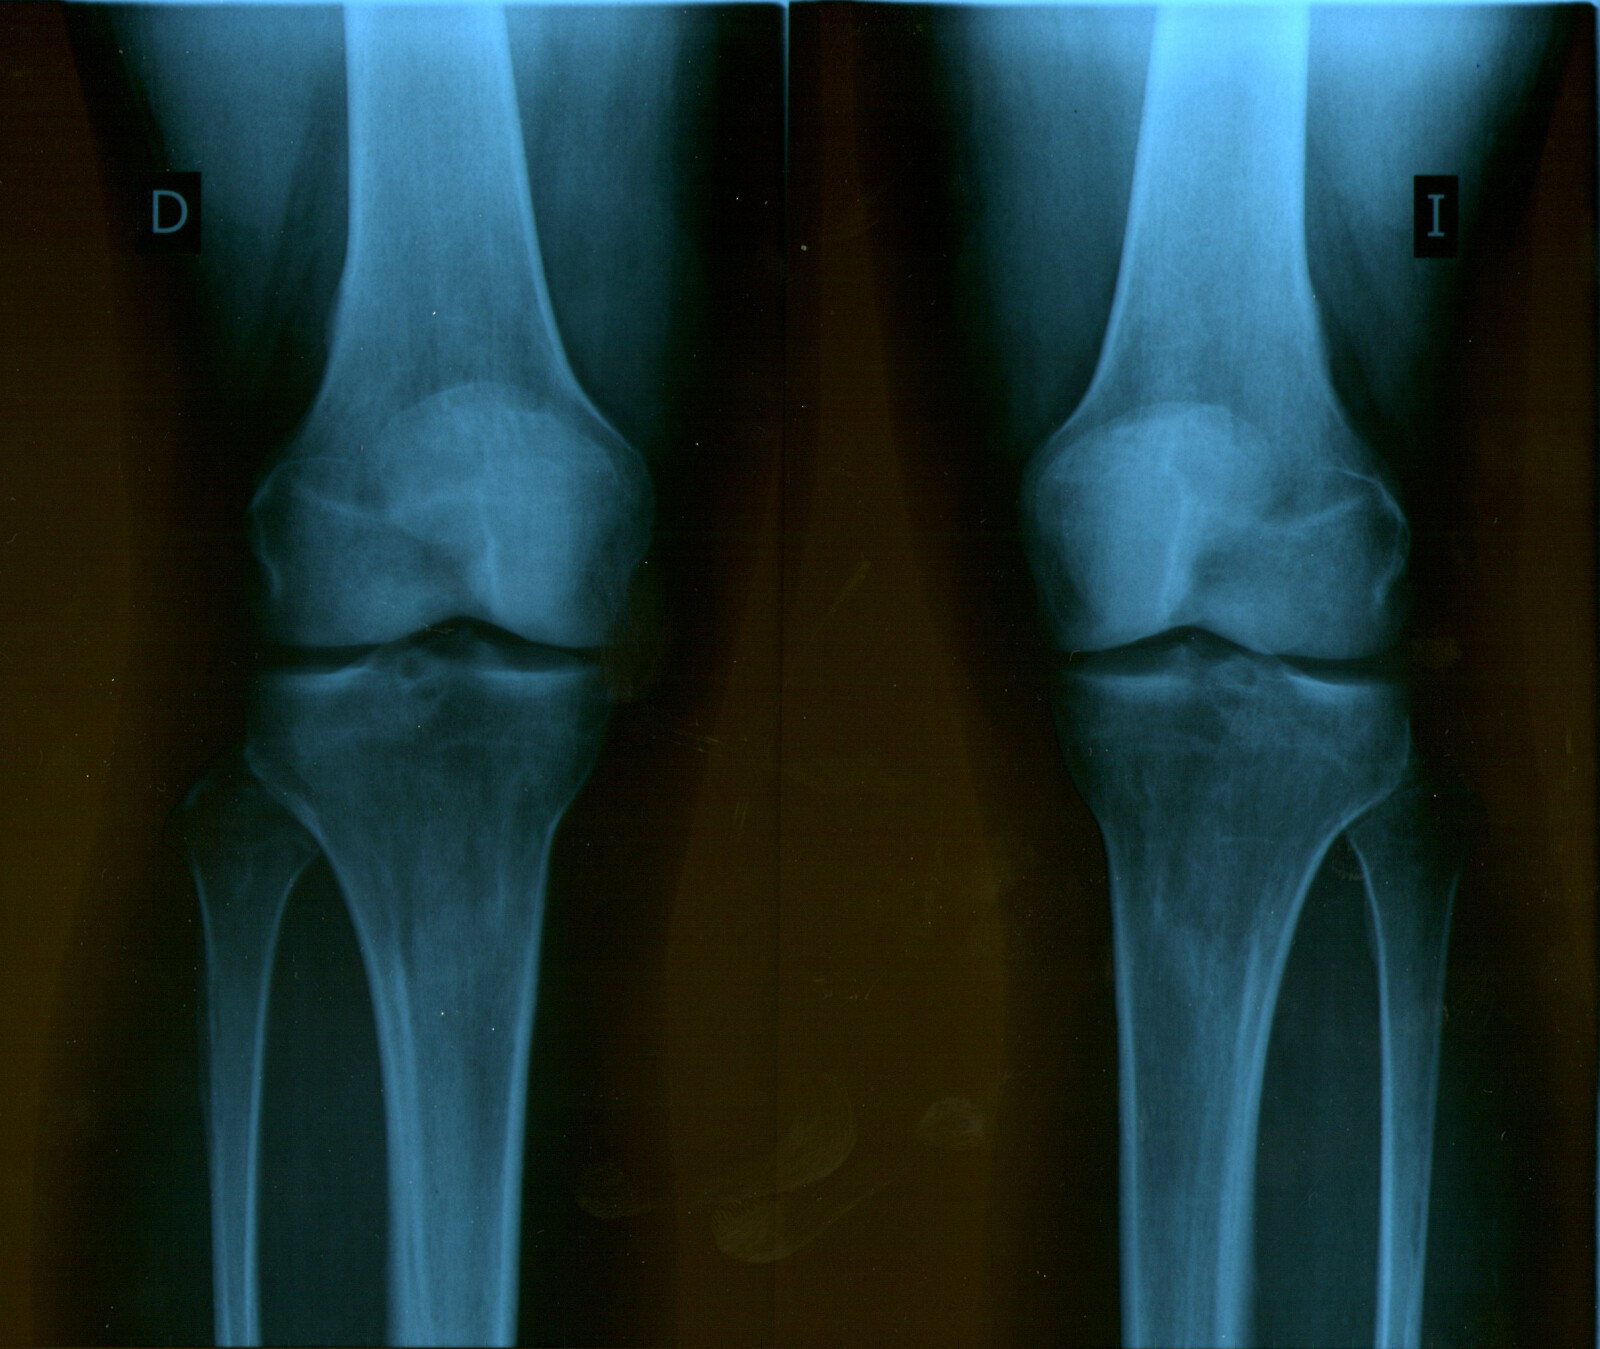 Orthopedic Injuries: Your Path to Compensation